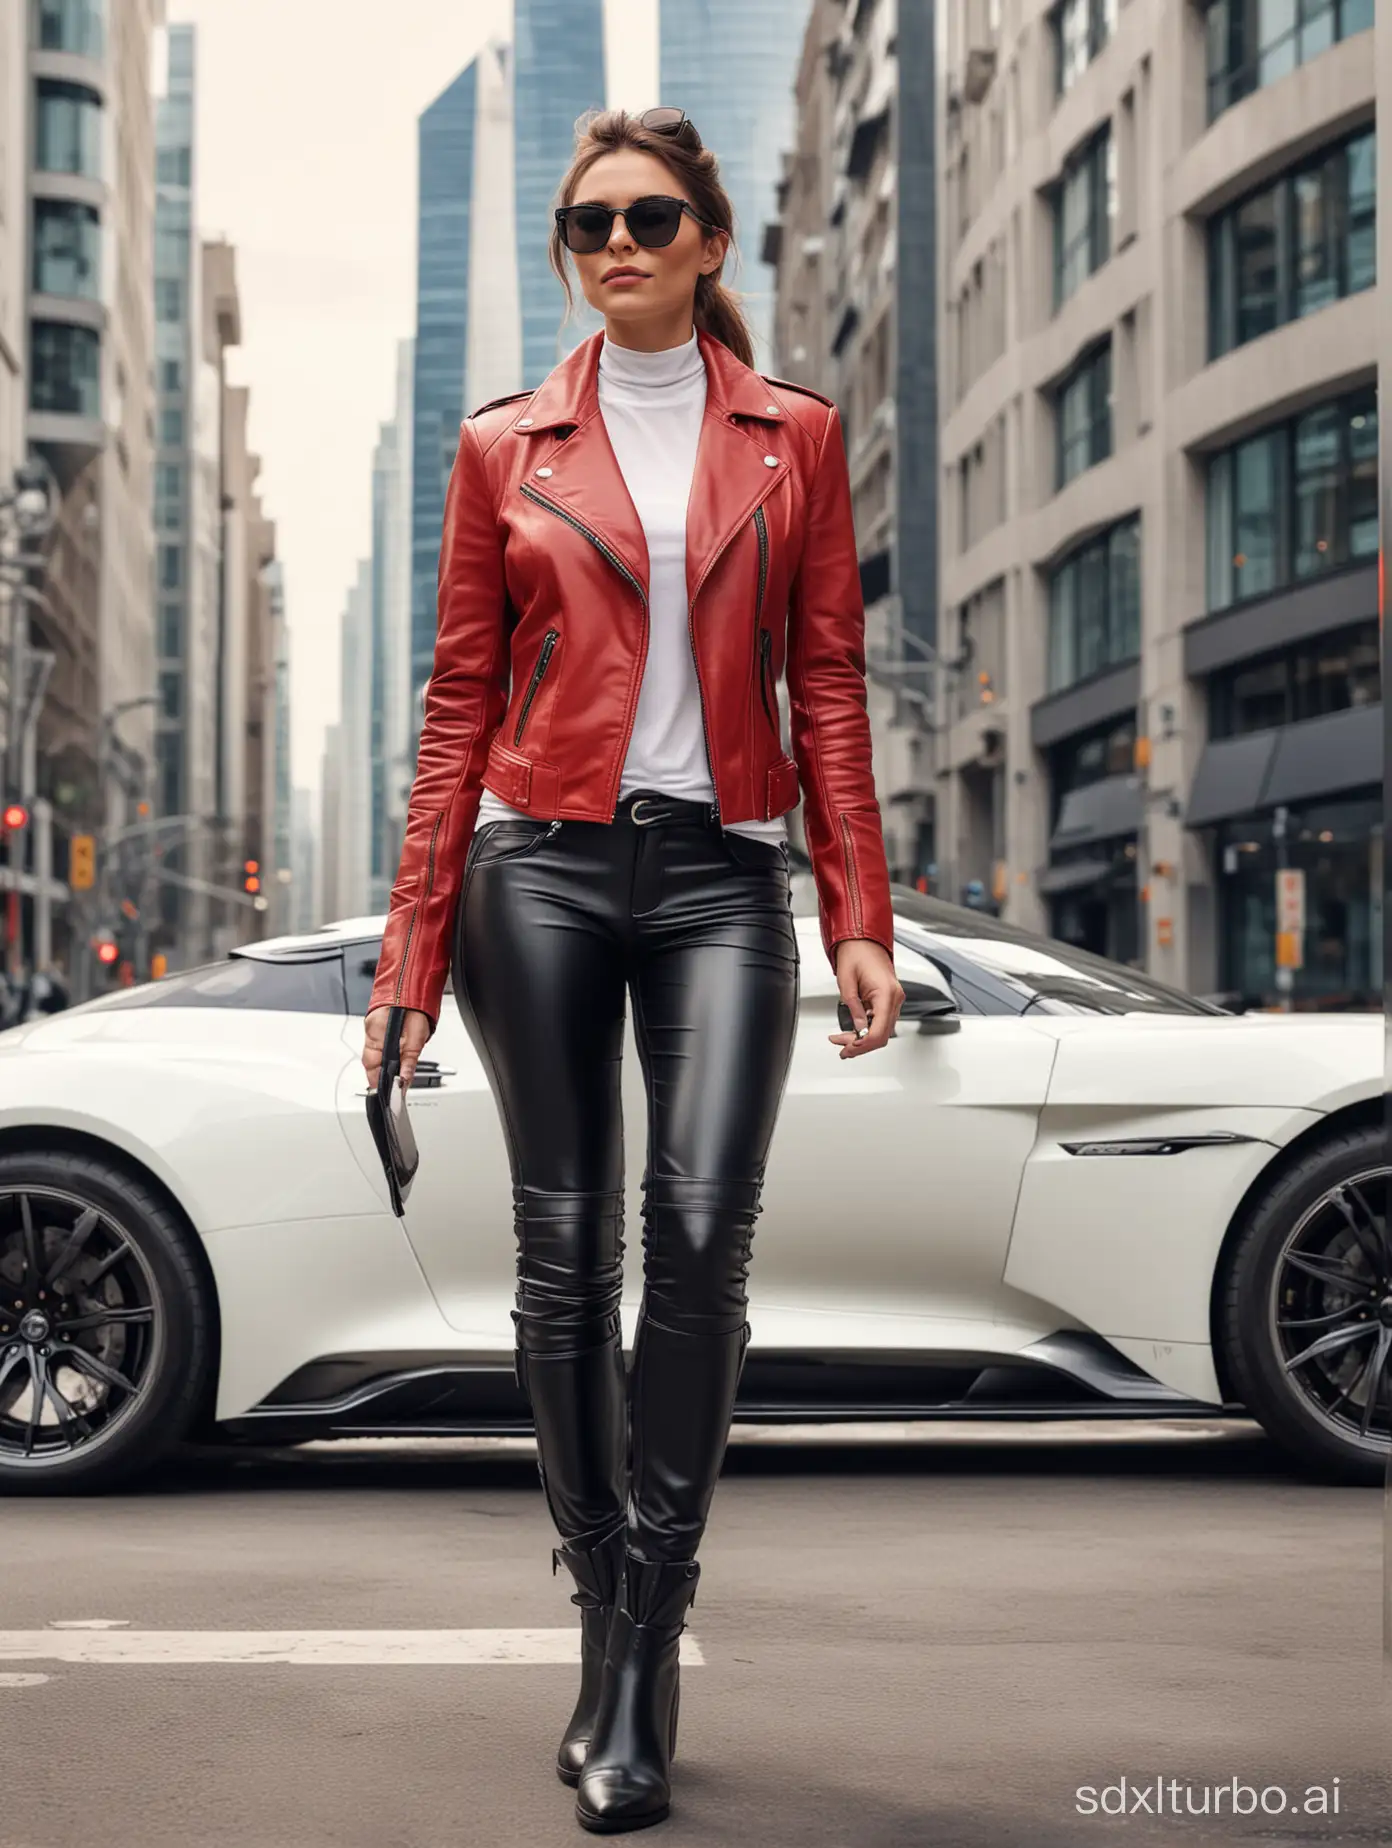 an anthropomorphic female cat wearing leather pants, a white tshirt, red leather jacket, black boots and sunglasses driving a white Aston Martin Valkyrie in a futuristic city background